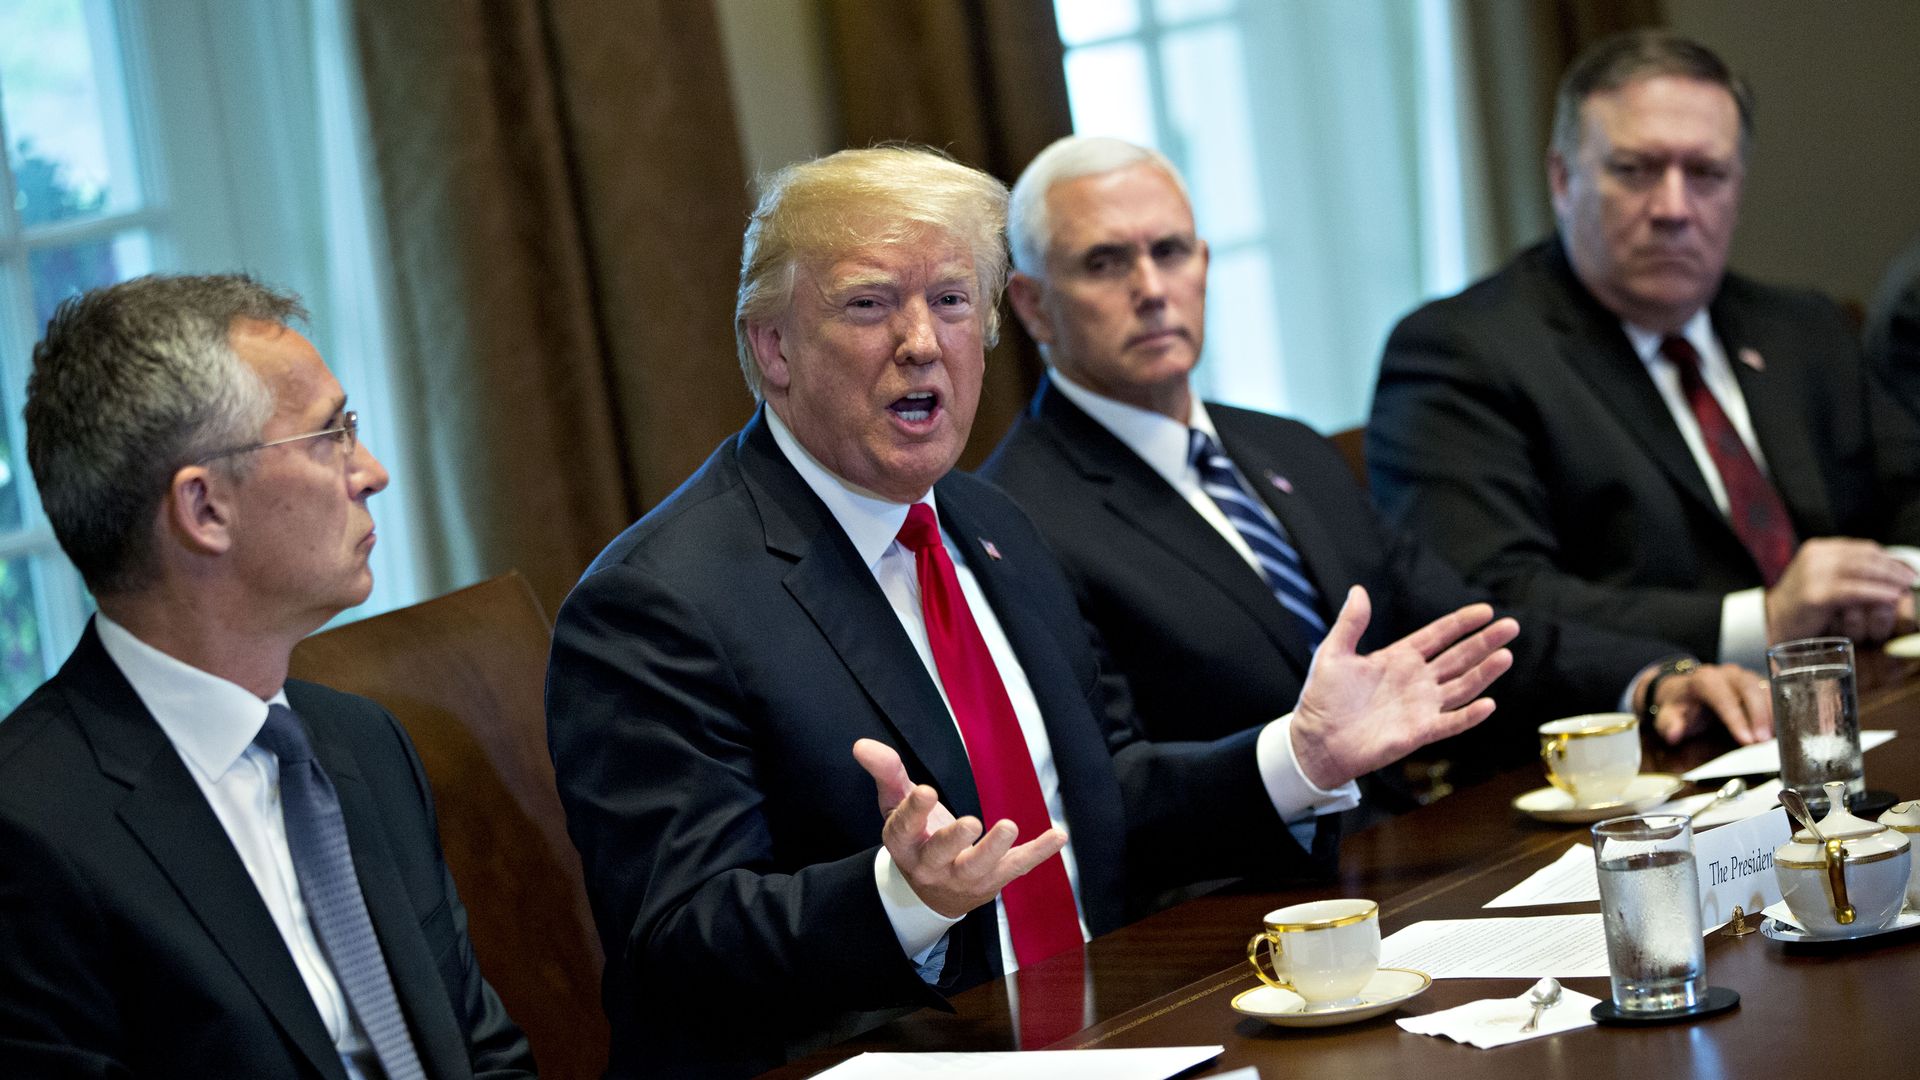 U.S. President Donald Trump speaks as Mike Pence, Mike Pompeo, and Jens Stoltenberg, secretary general of NATO, listen during a meeting in the Cabinet Room of the White House on May 17, 2018.